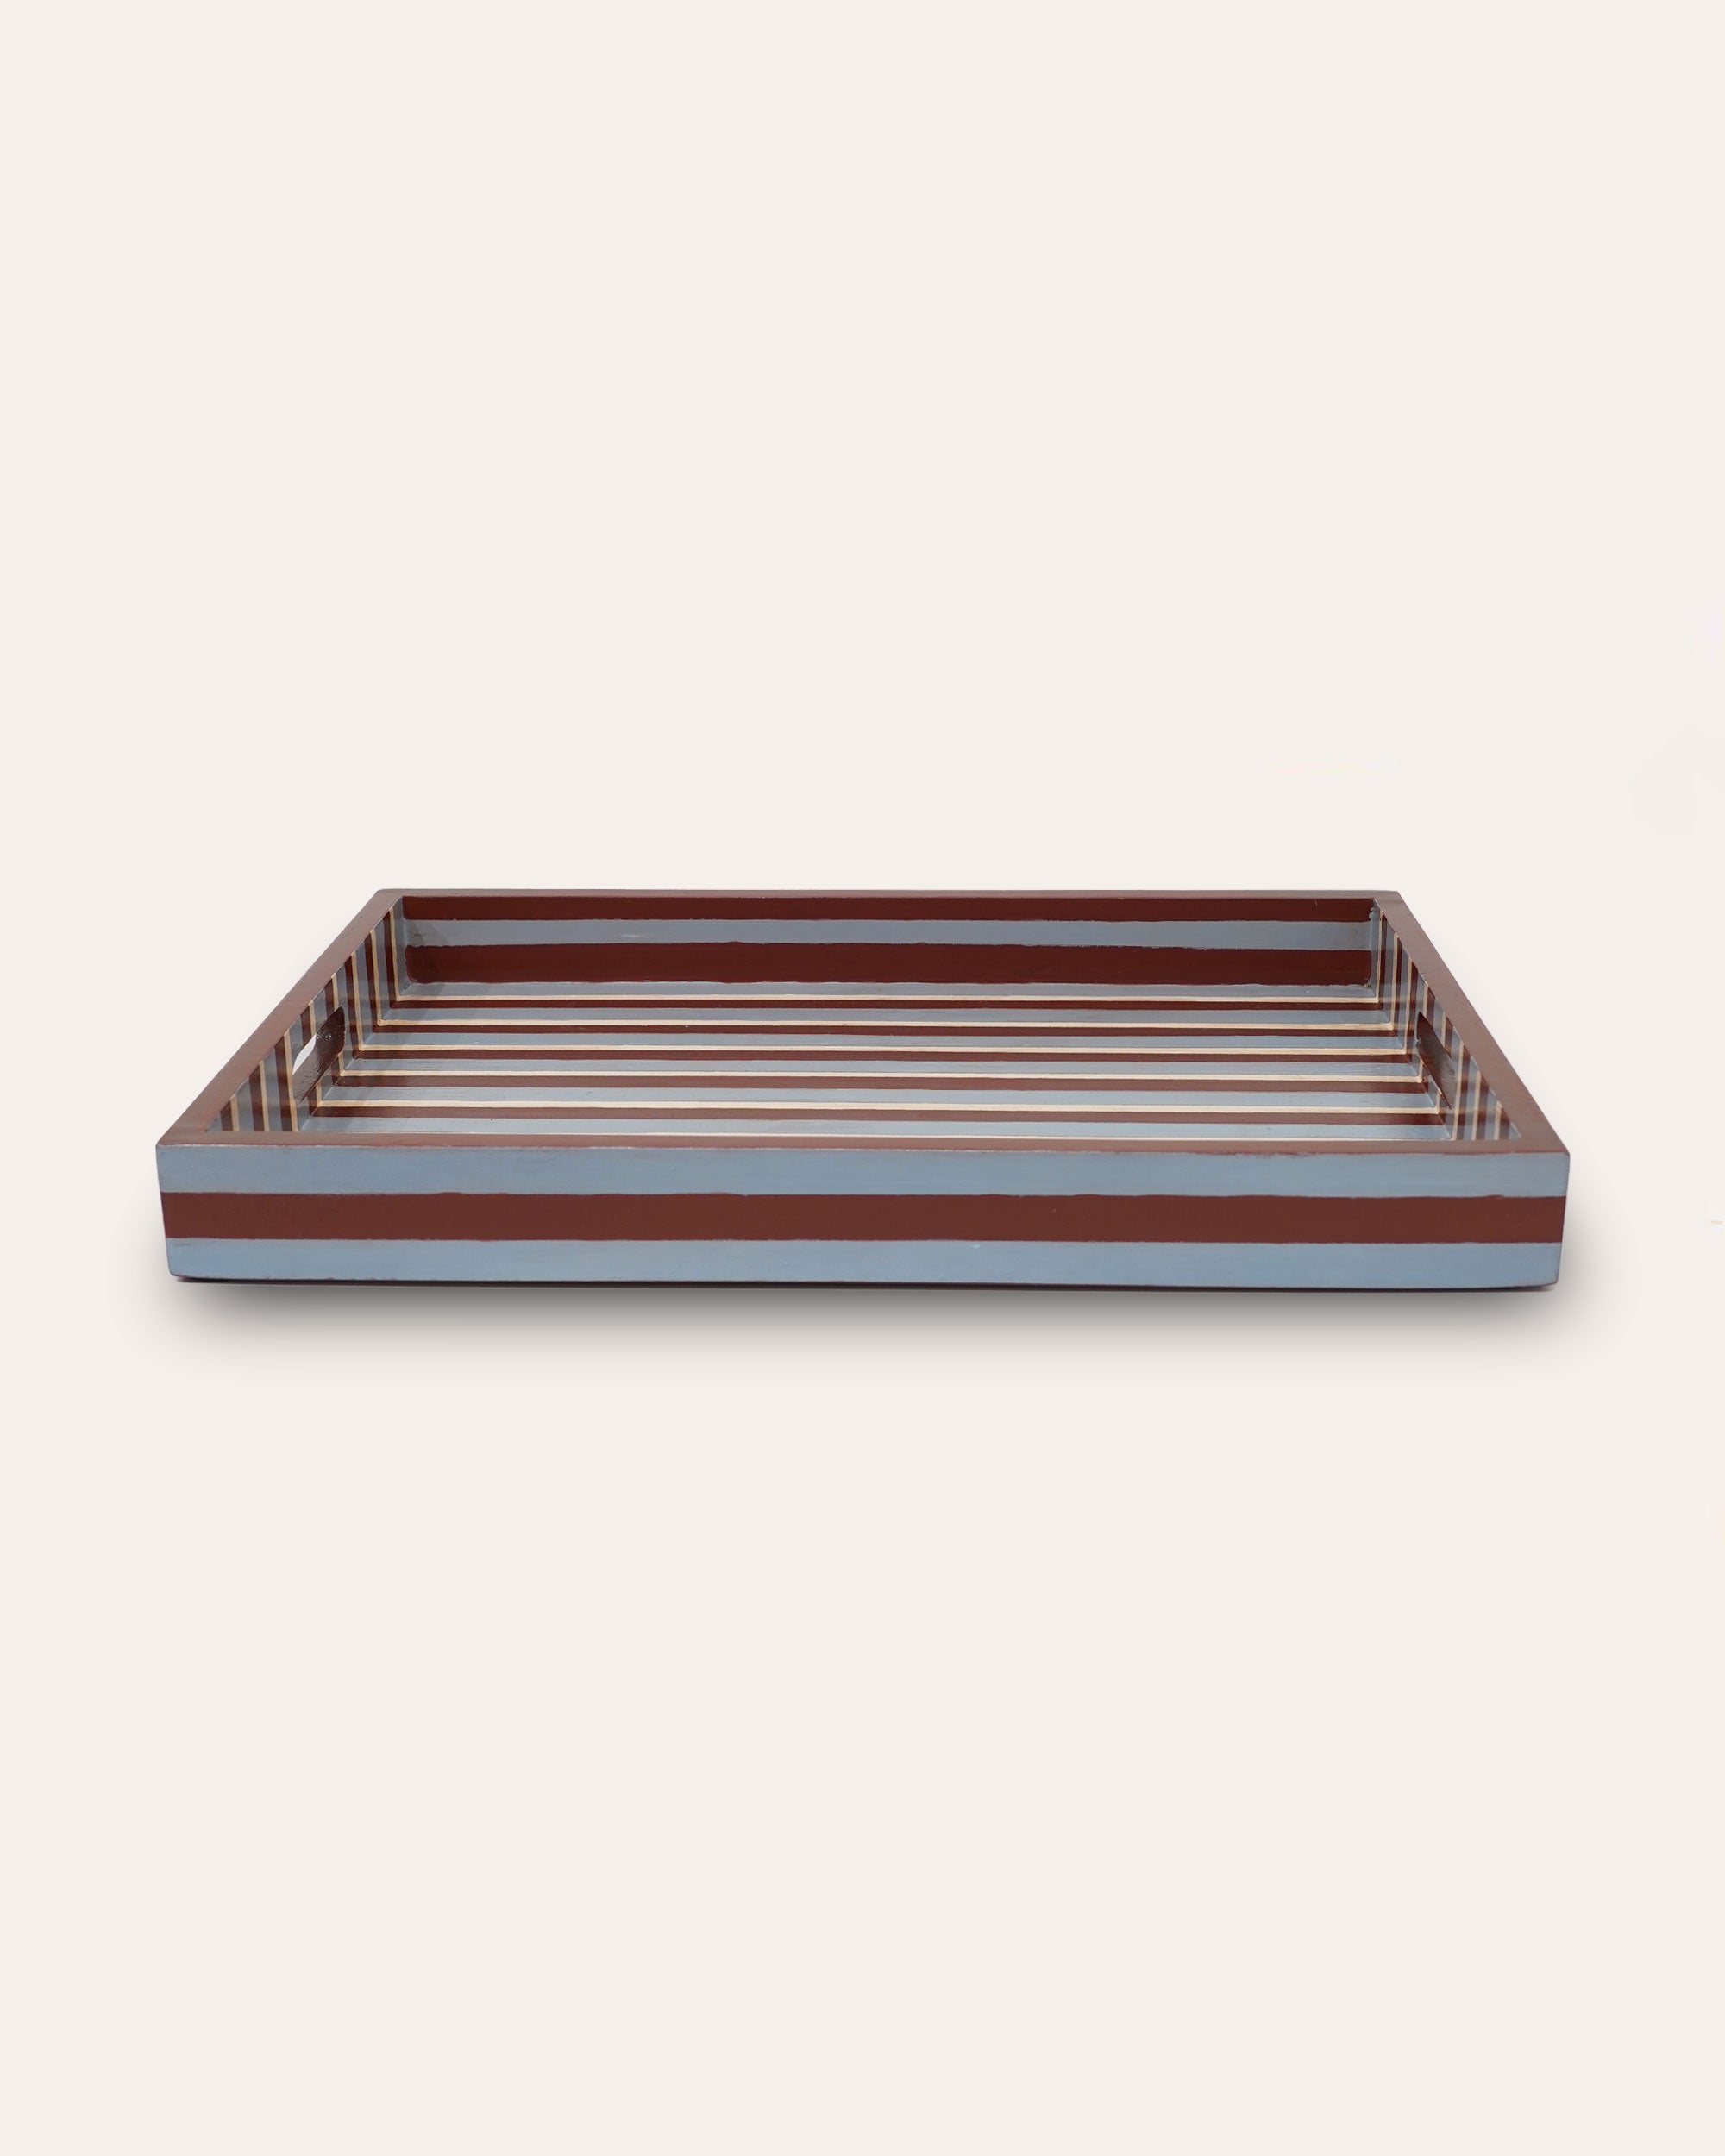 The Chic Stripey Tray - Large